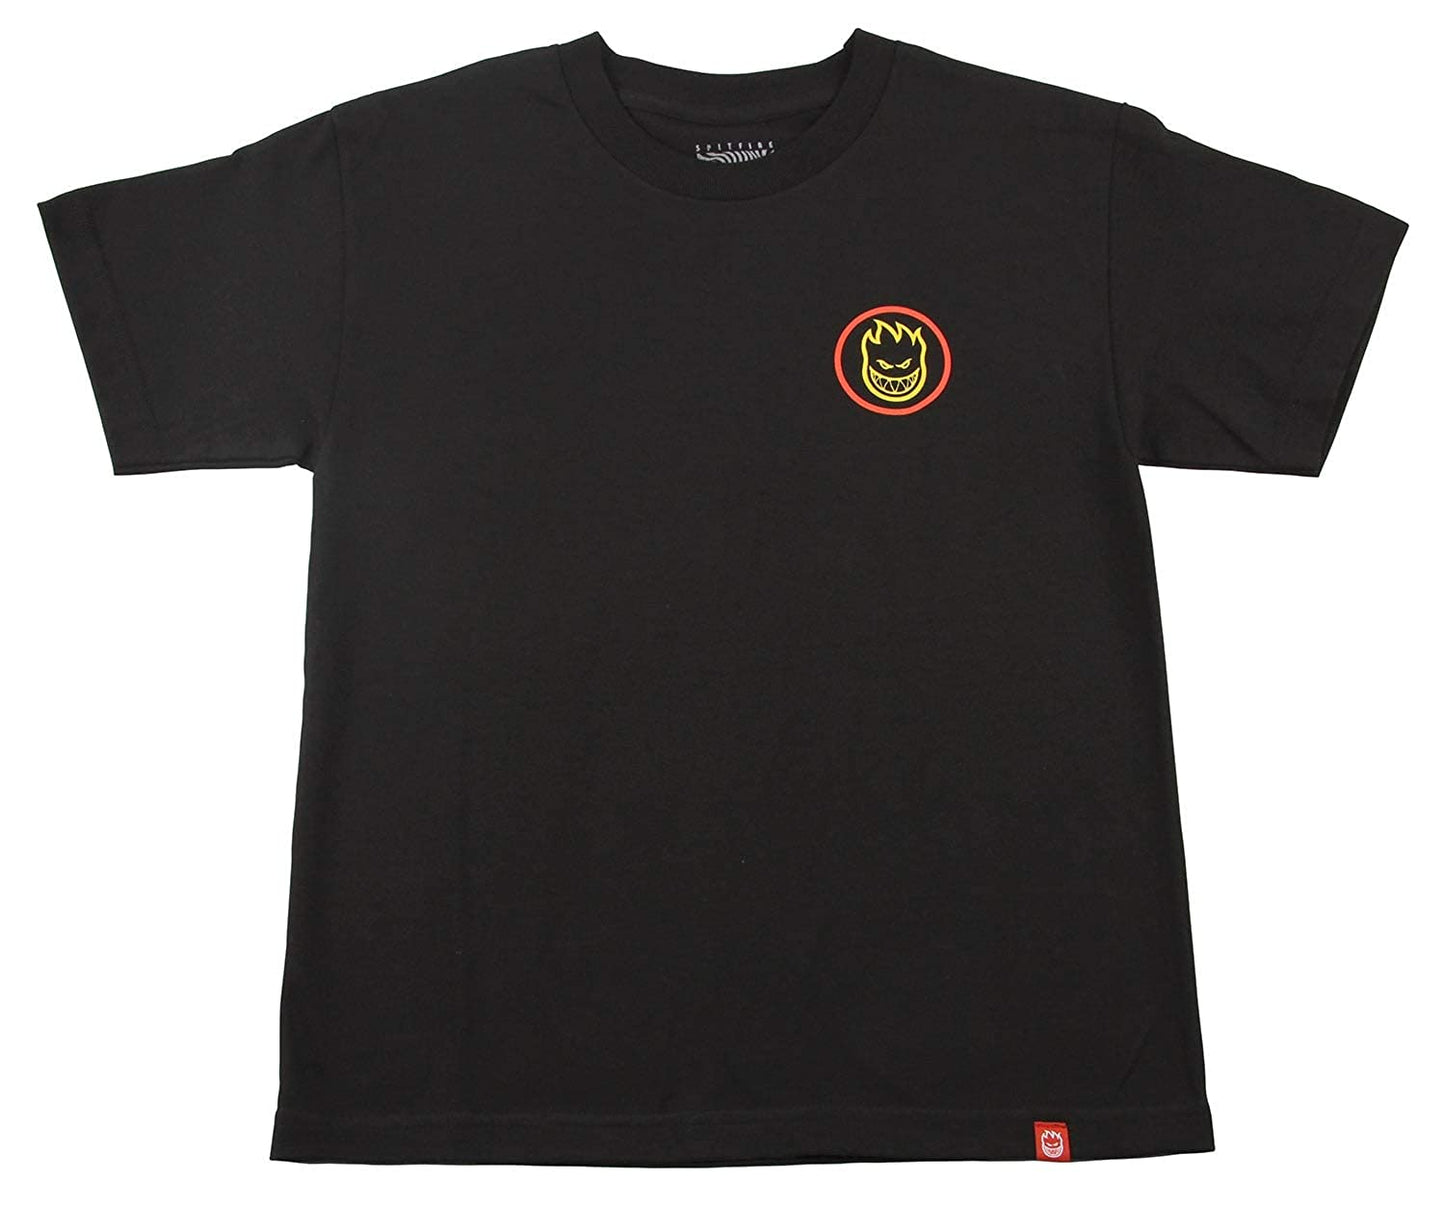 SPITFIRE CLASSIC SWIRL FADE S/S TEE BLACK YELLOW RED